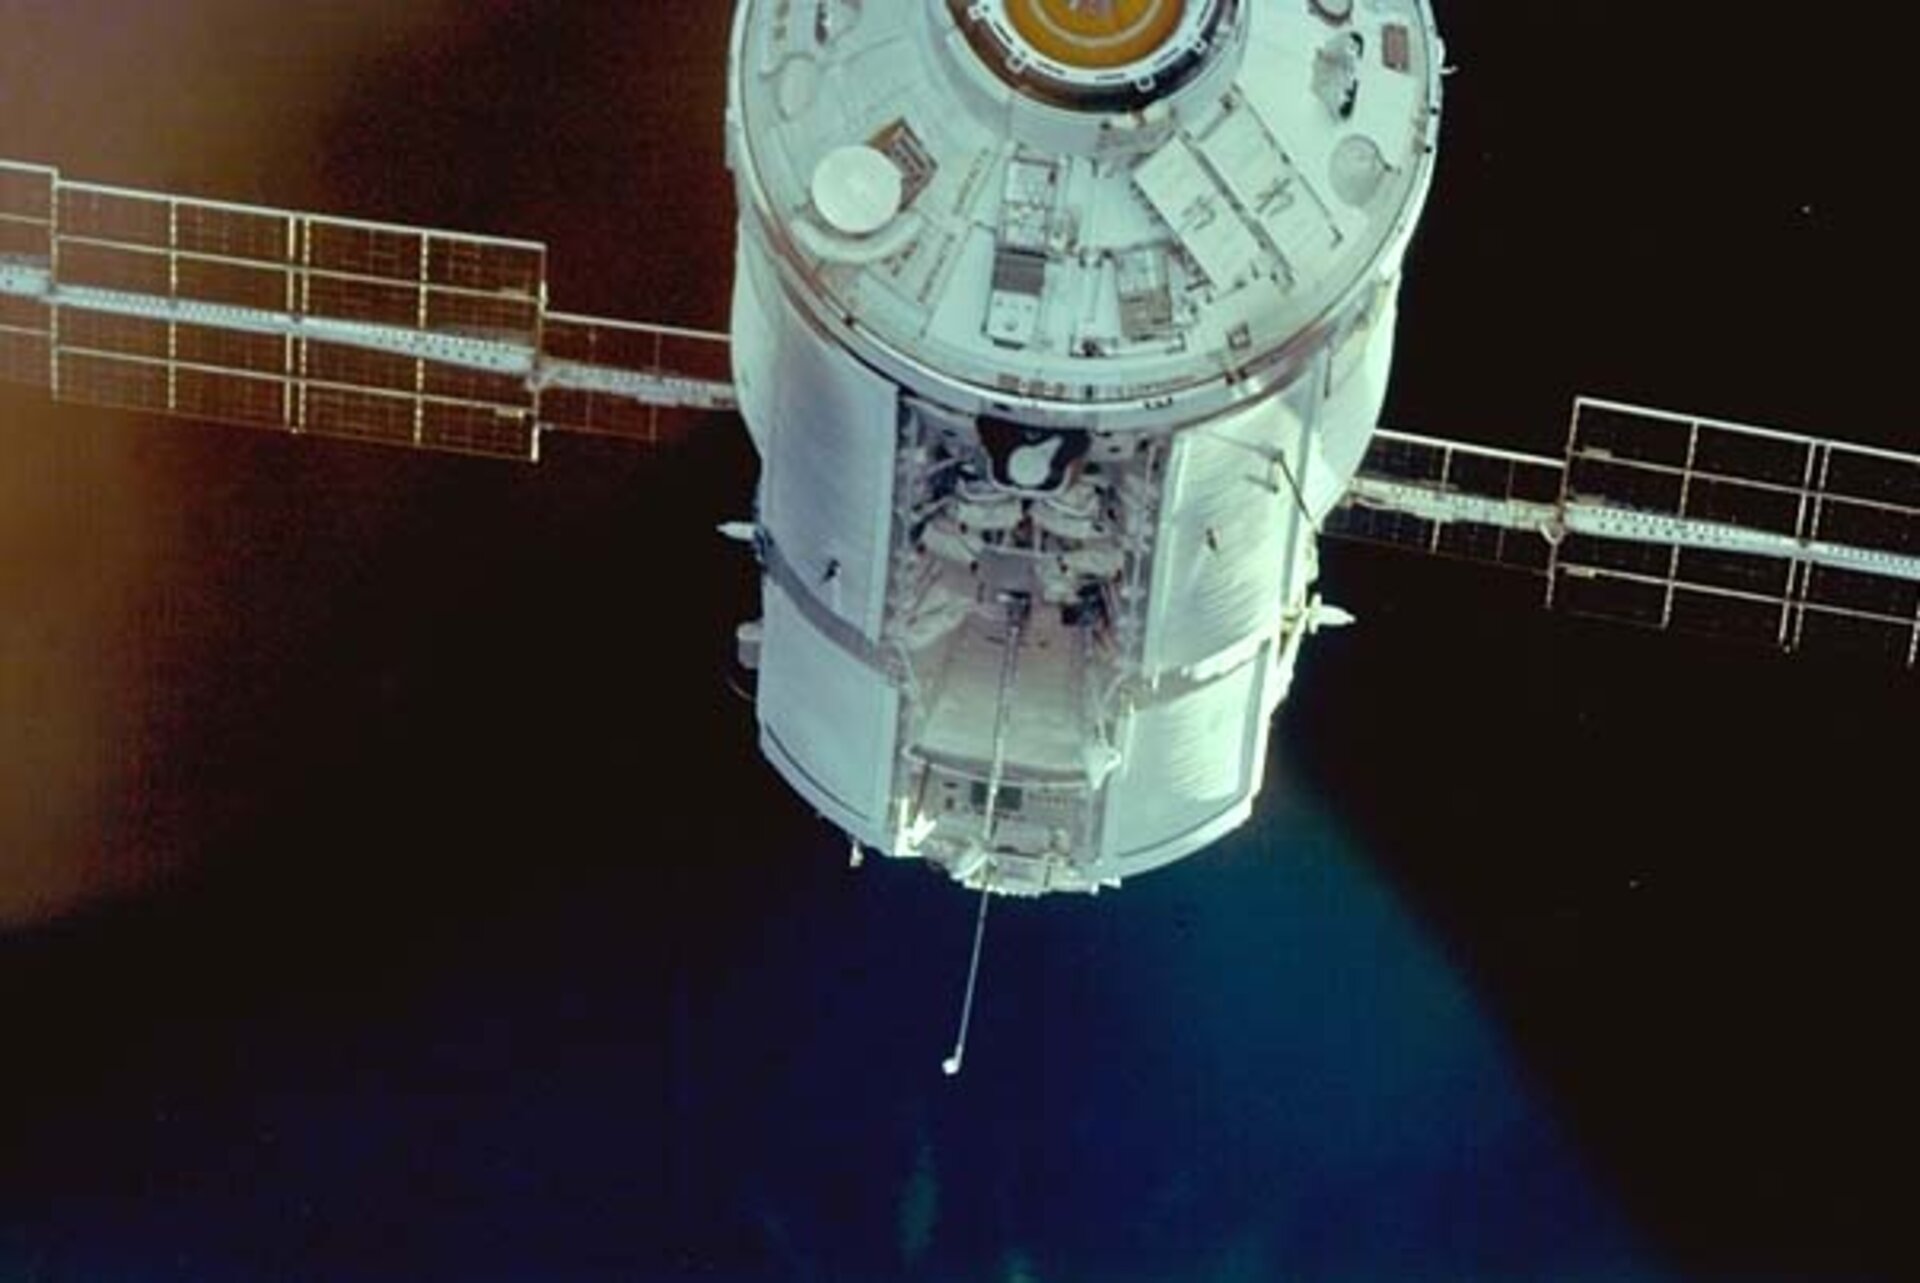 STS-88